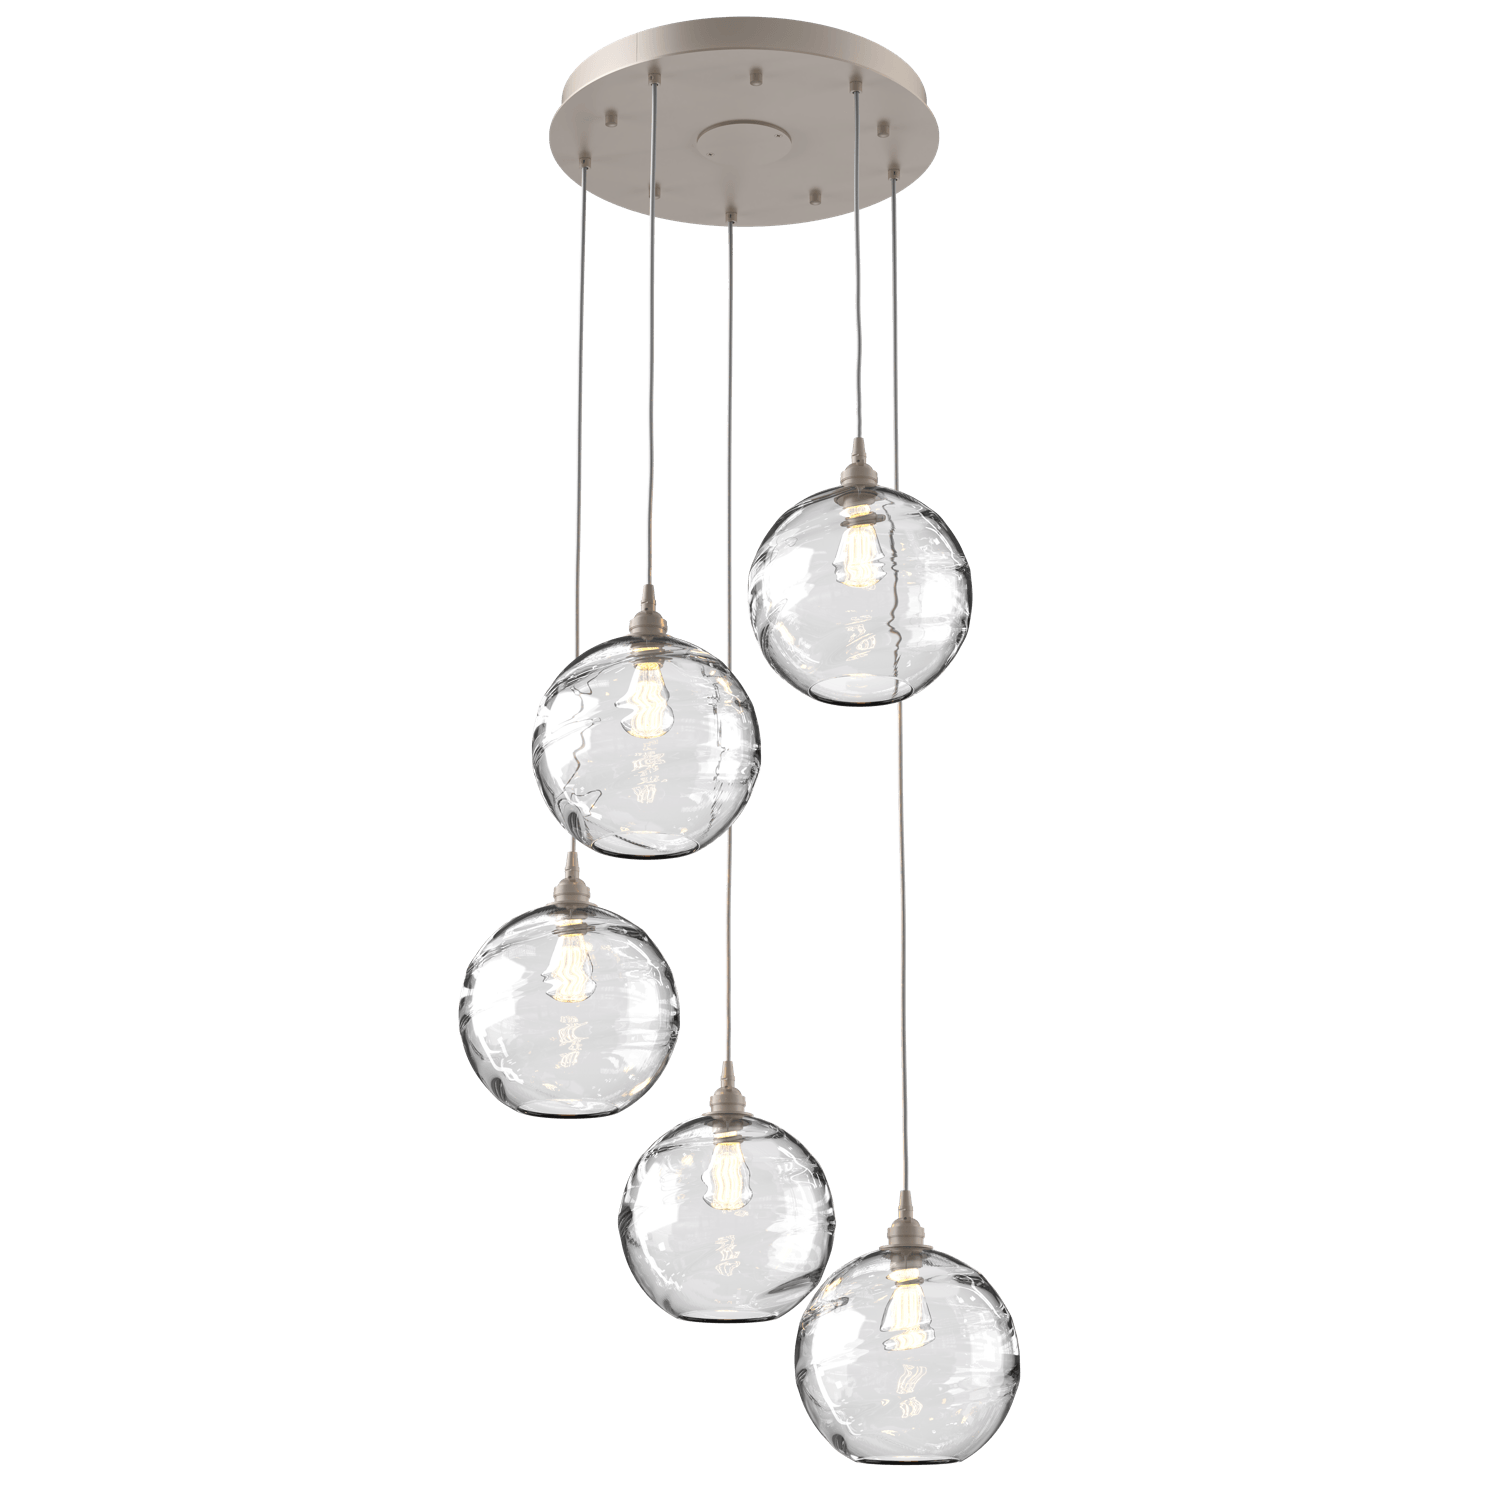 CHB0047-05-BS-OC-Hammerton-Studio-Optic-Blown-Glass-Terra-5-light-round-pendant-chandelier-with-metallic-beige-silver-finish-and-optic-clear-blown-glass-shades-and-incandescent-lamping